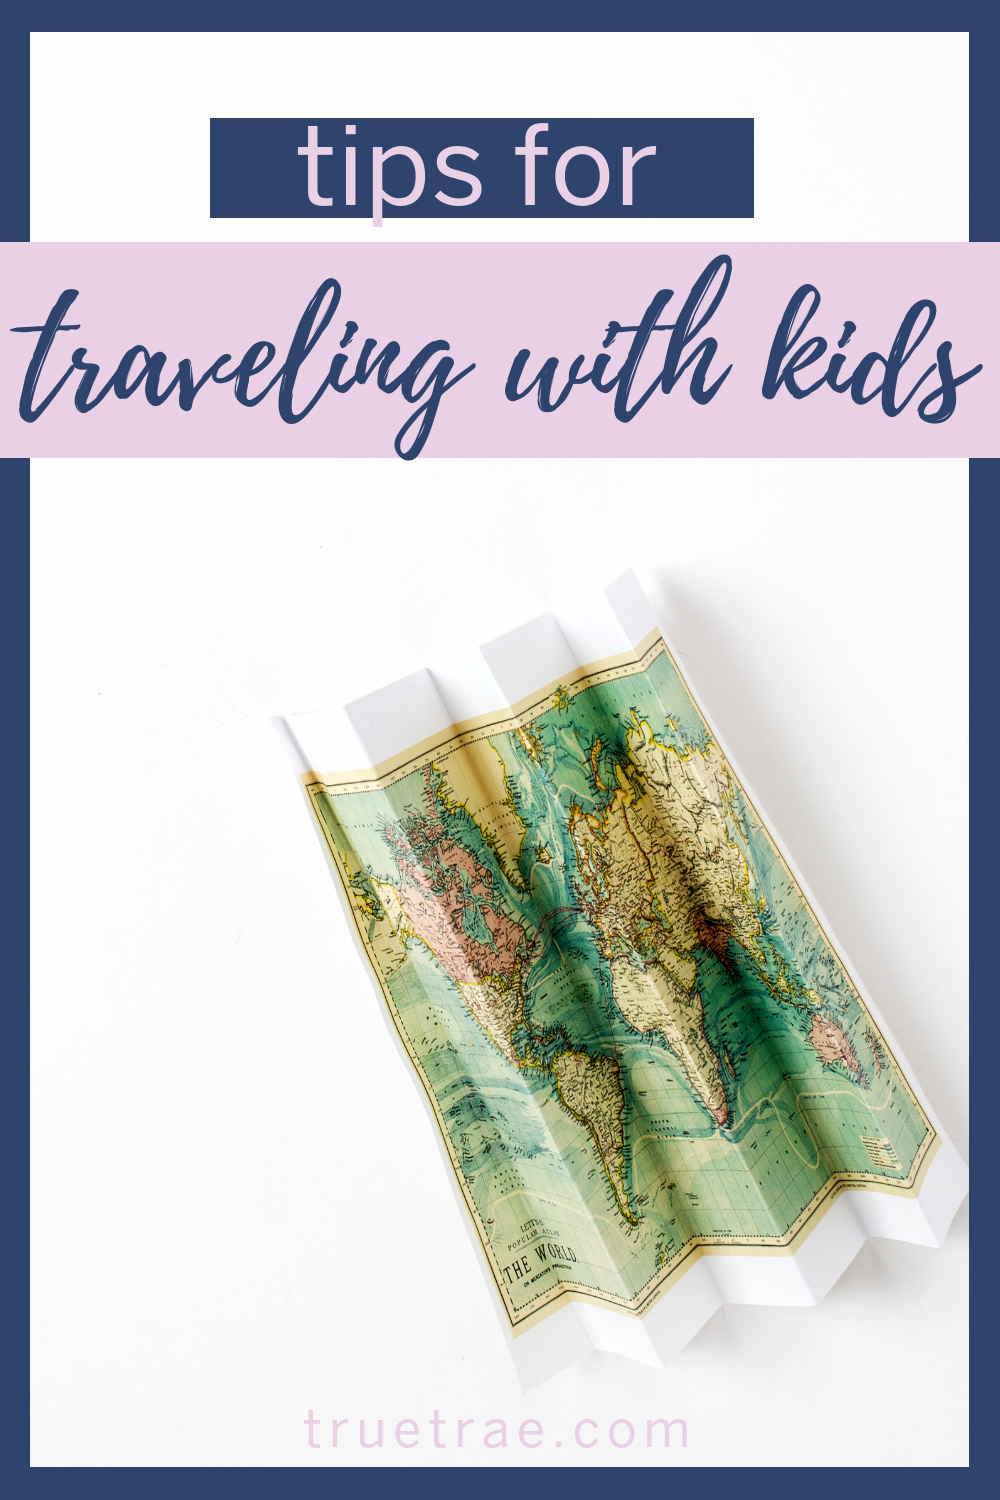 These are a few of my favorite tried-and-true tips for traveling with kids to help make trips and vacations with young children a more pleasant experience for everyone on your family vacation! #traveltips #parentingtips #travelingwithkids #kidtravel